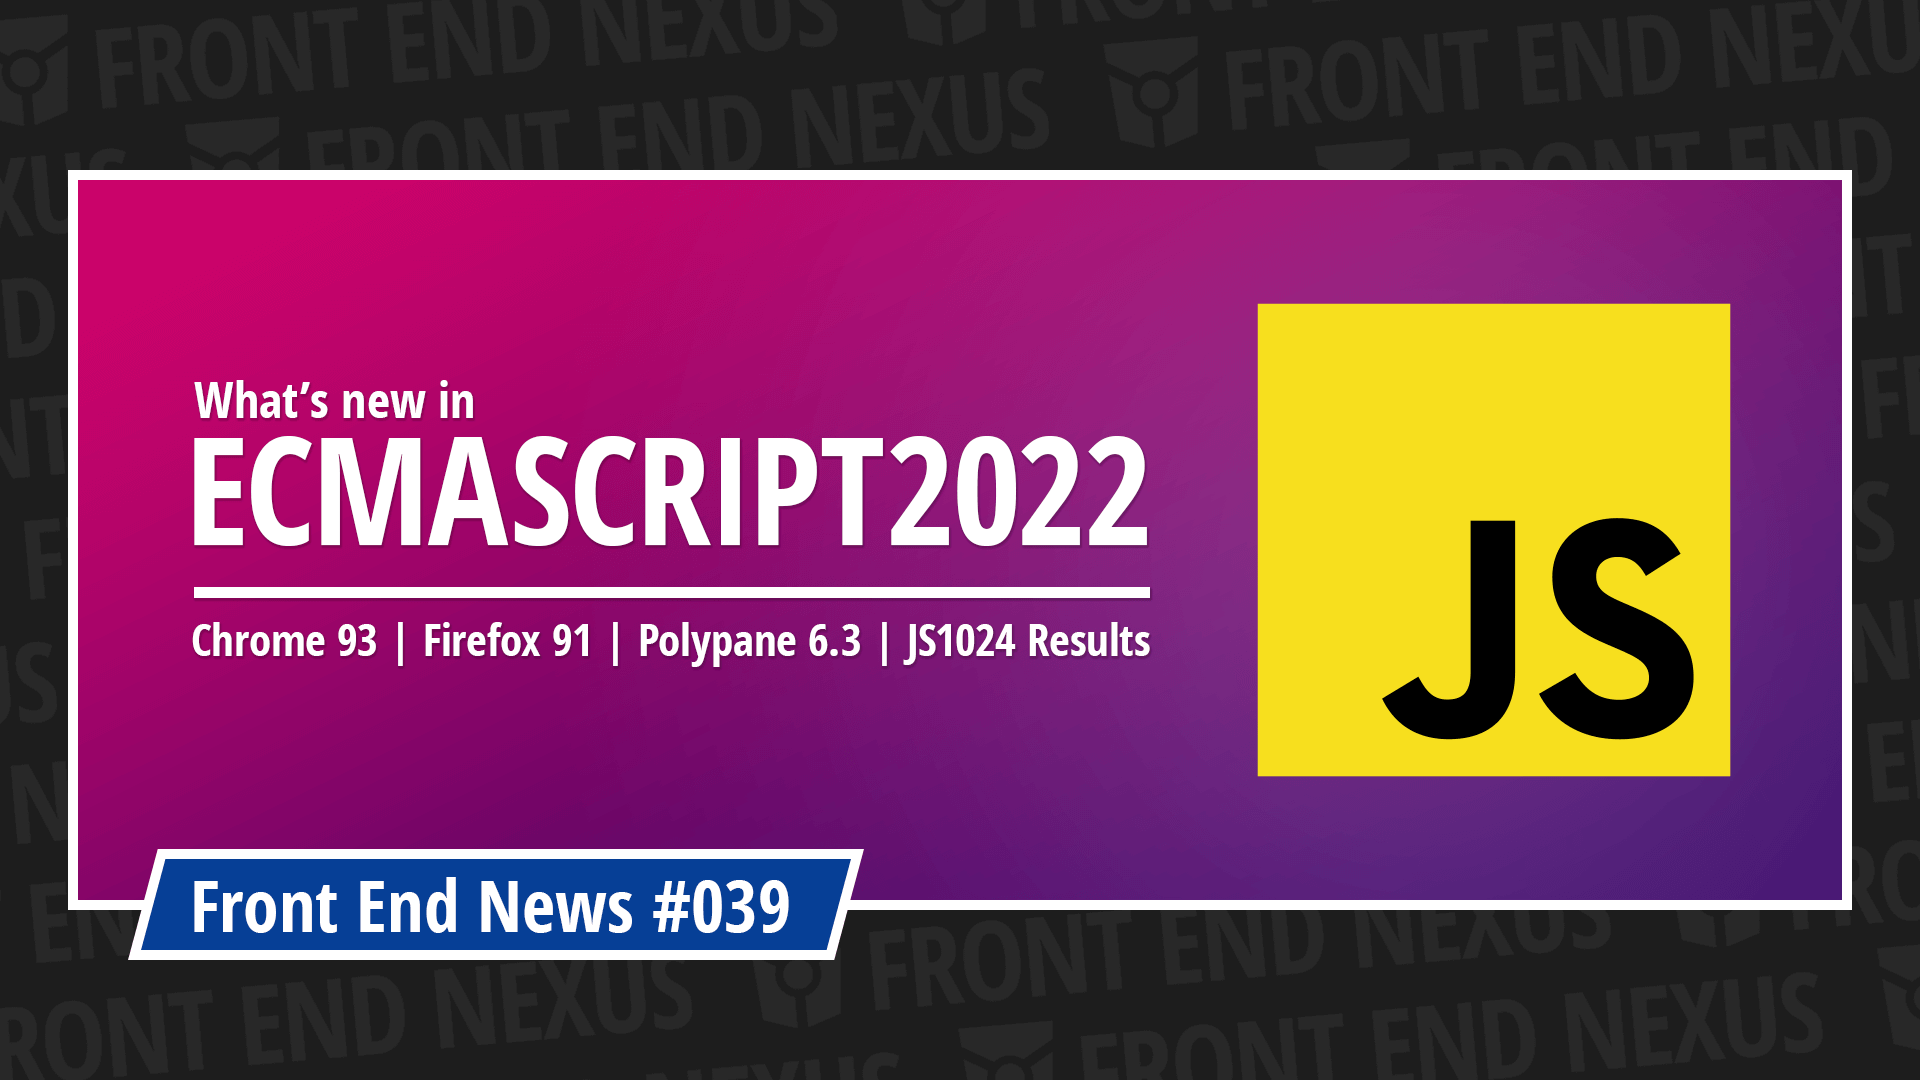 What's new in ES2022, JS1024 Results, Chrome 93, Firefox 91, Polypane 6.3, and more | Front End News #039